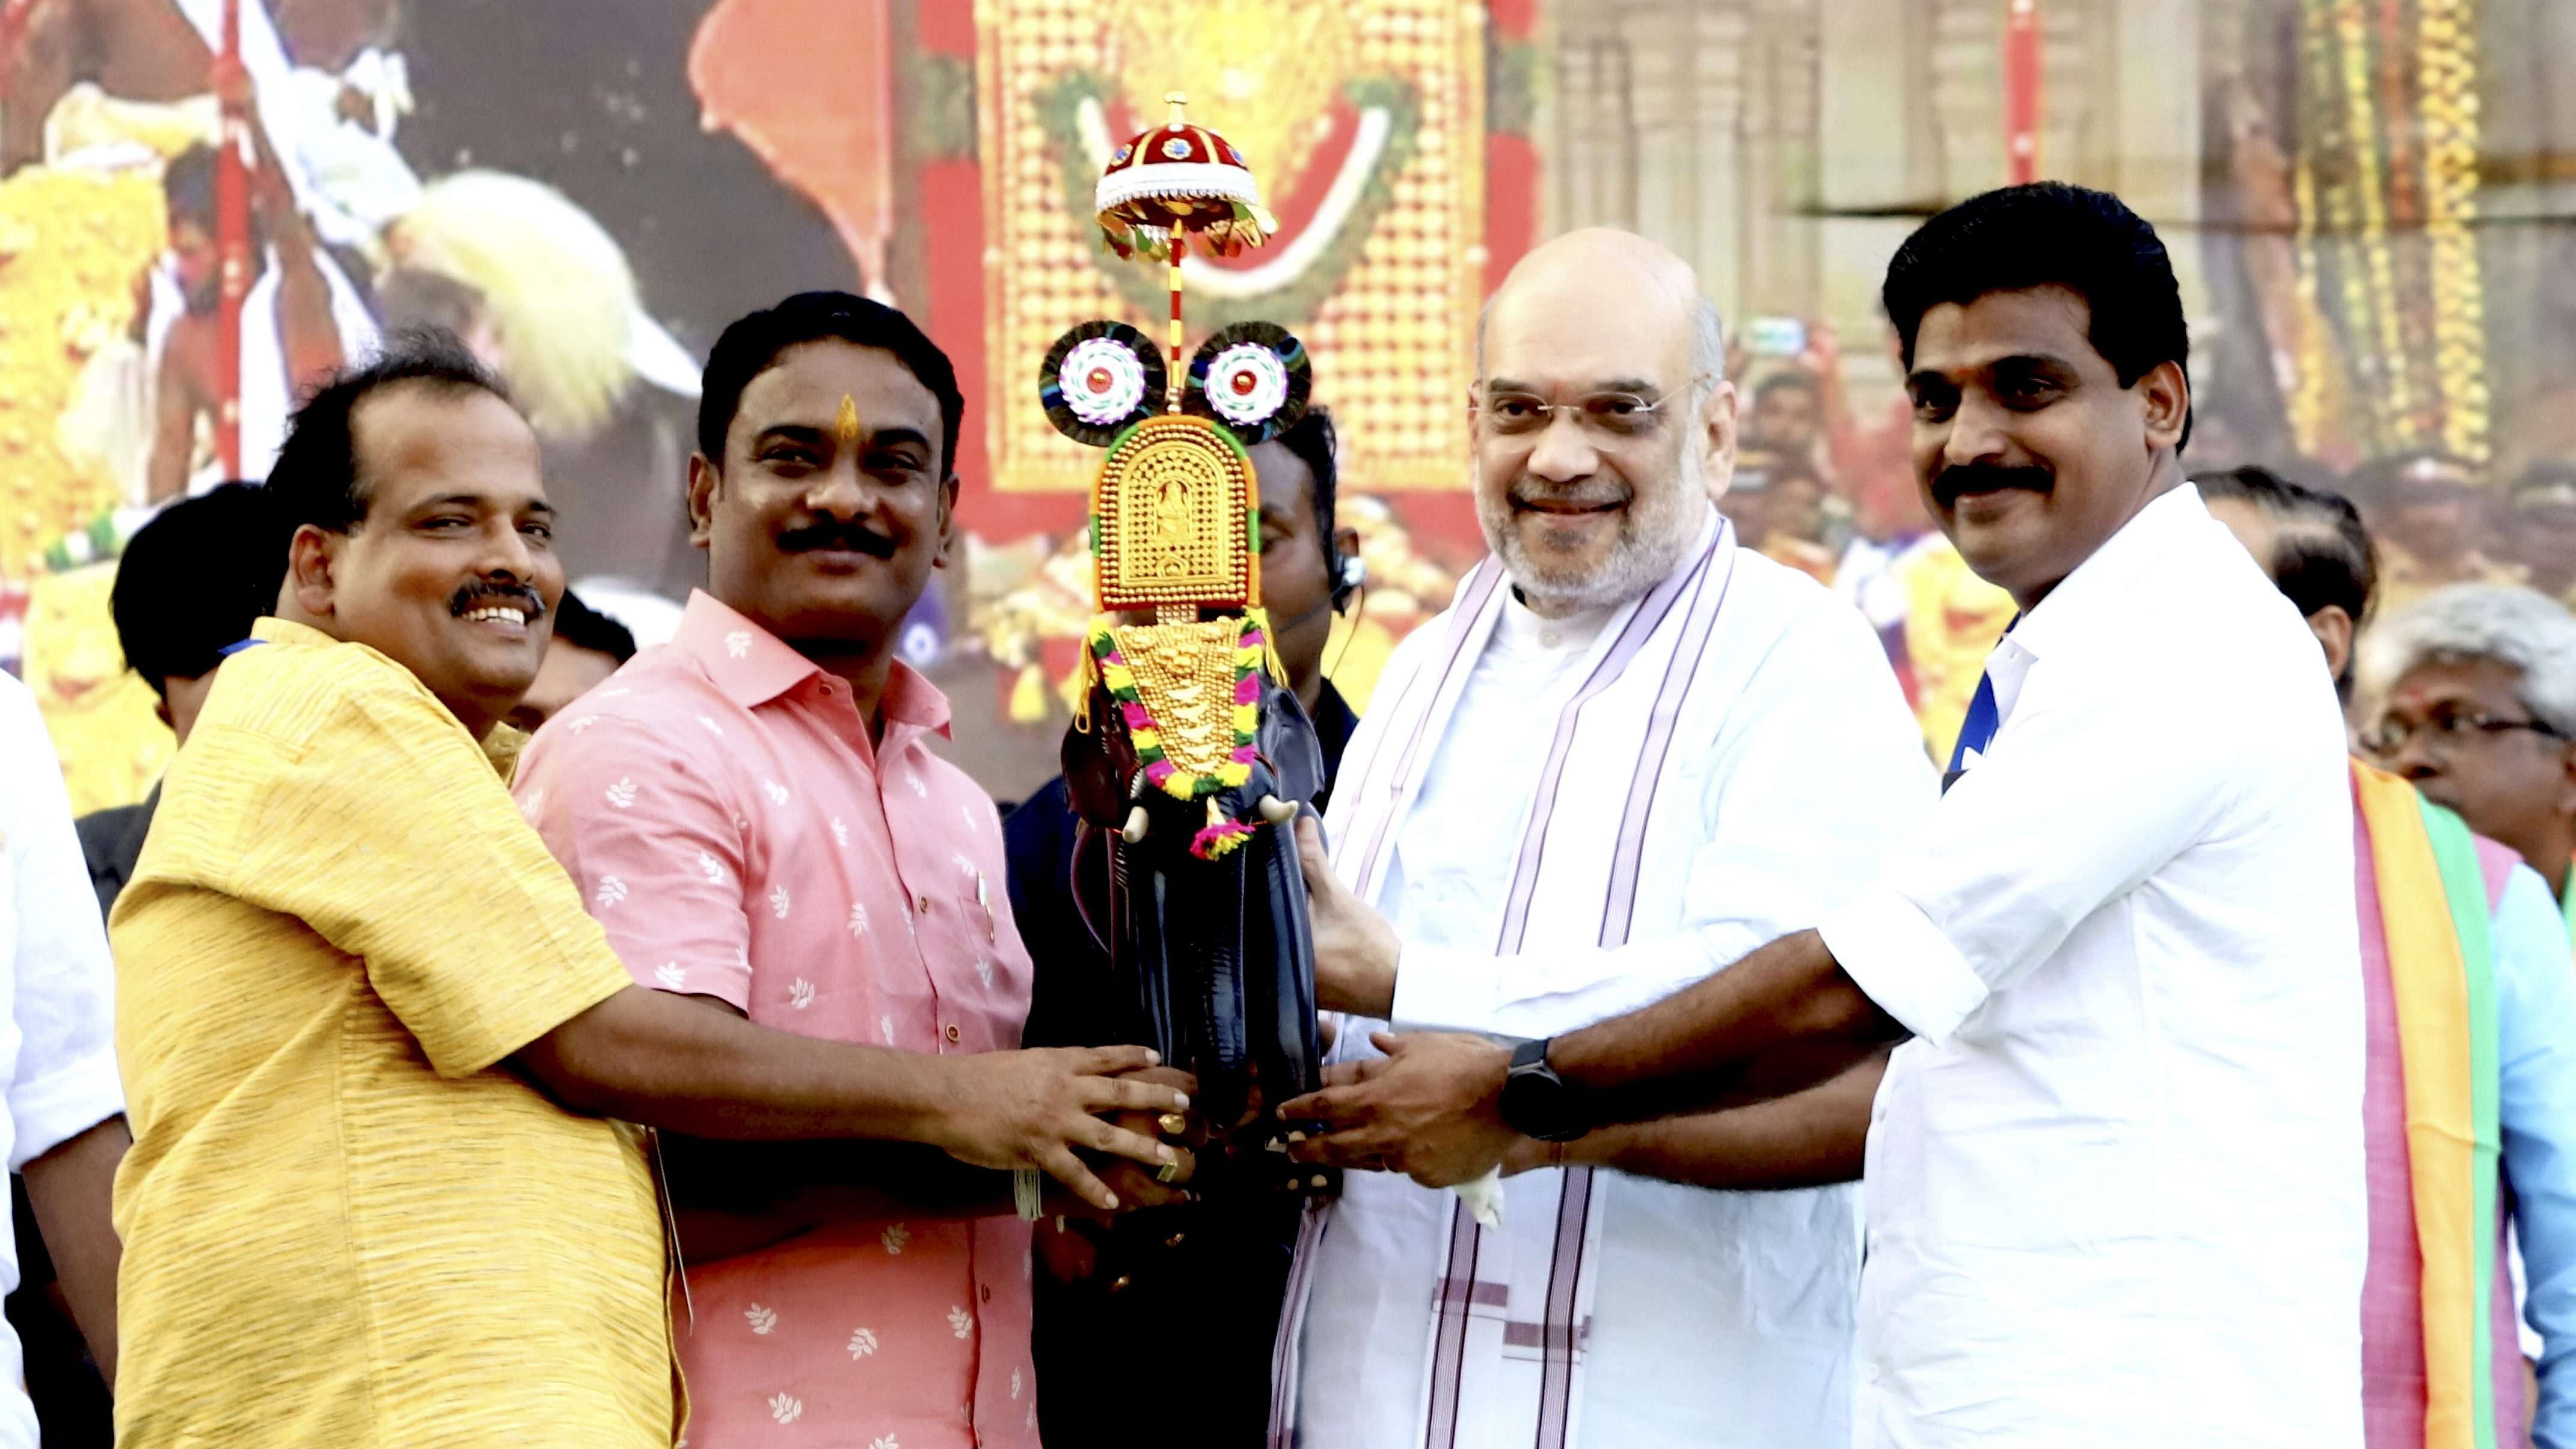  Union Home Minister Amit Shah being felicitated by BJP leaders during a public rally, in Thrissur, Sunday, March 12. Credit: PTI Photo